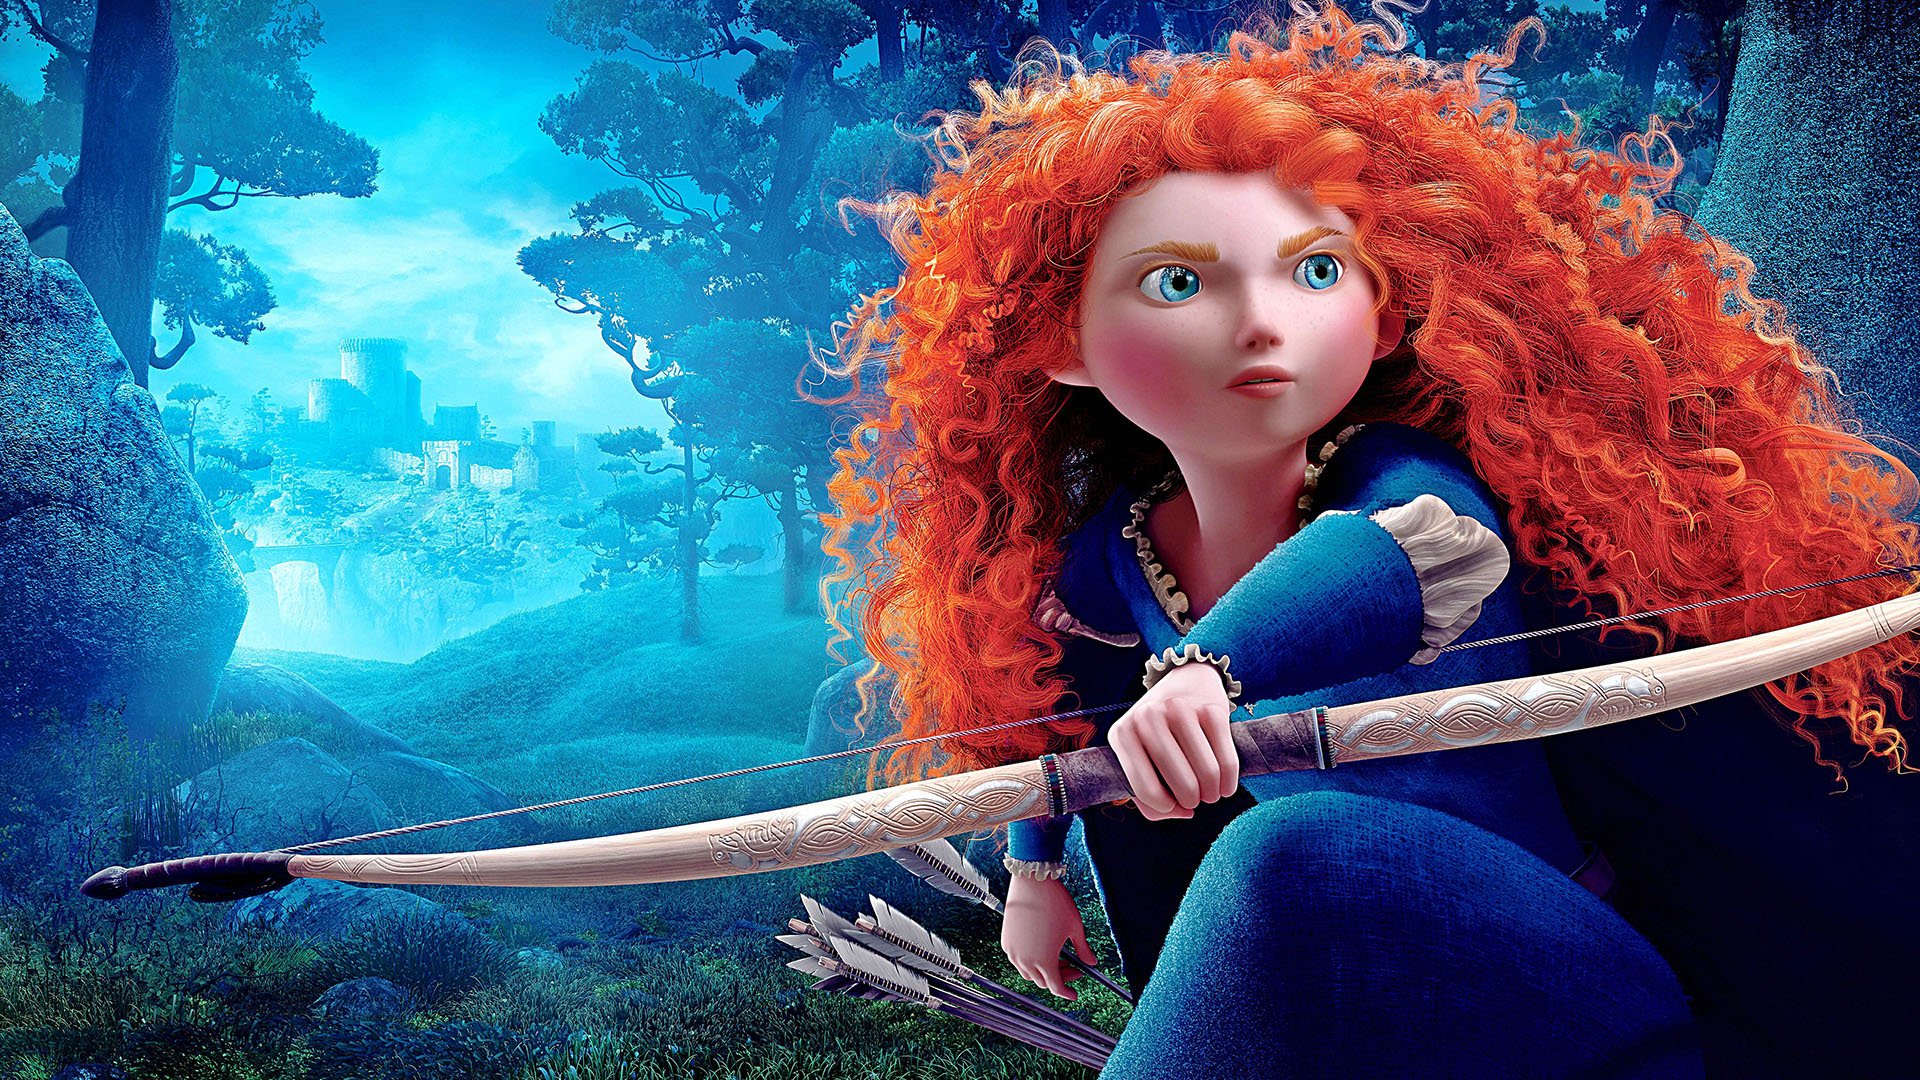 Review: "Brave" gives traditional fairy tales a feminist spin - The ...